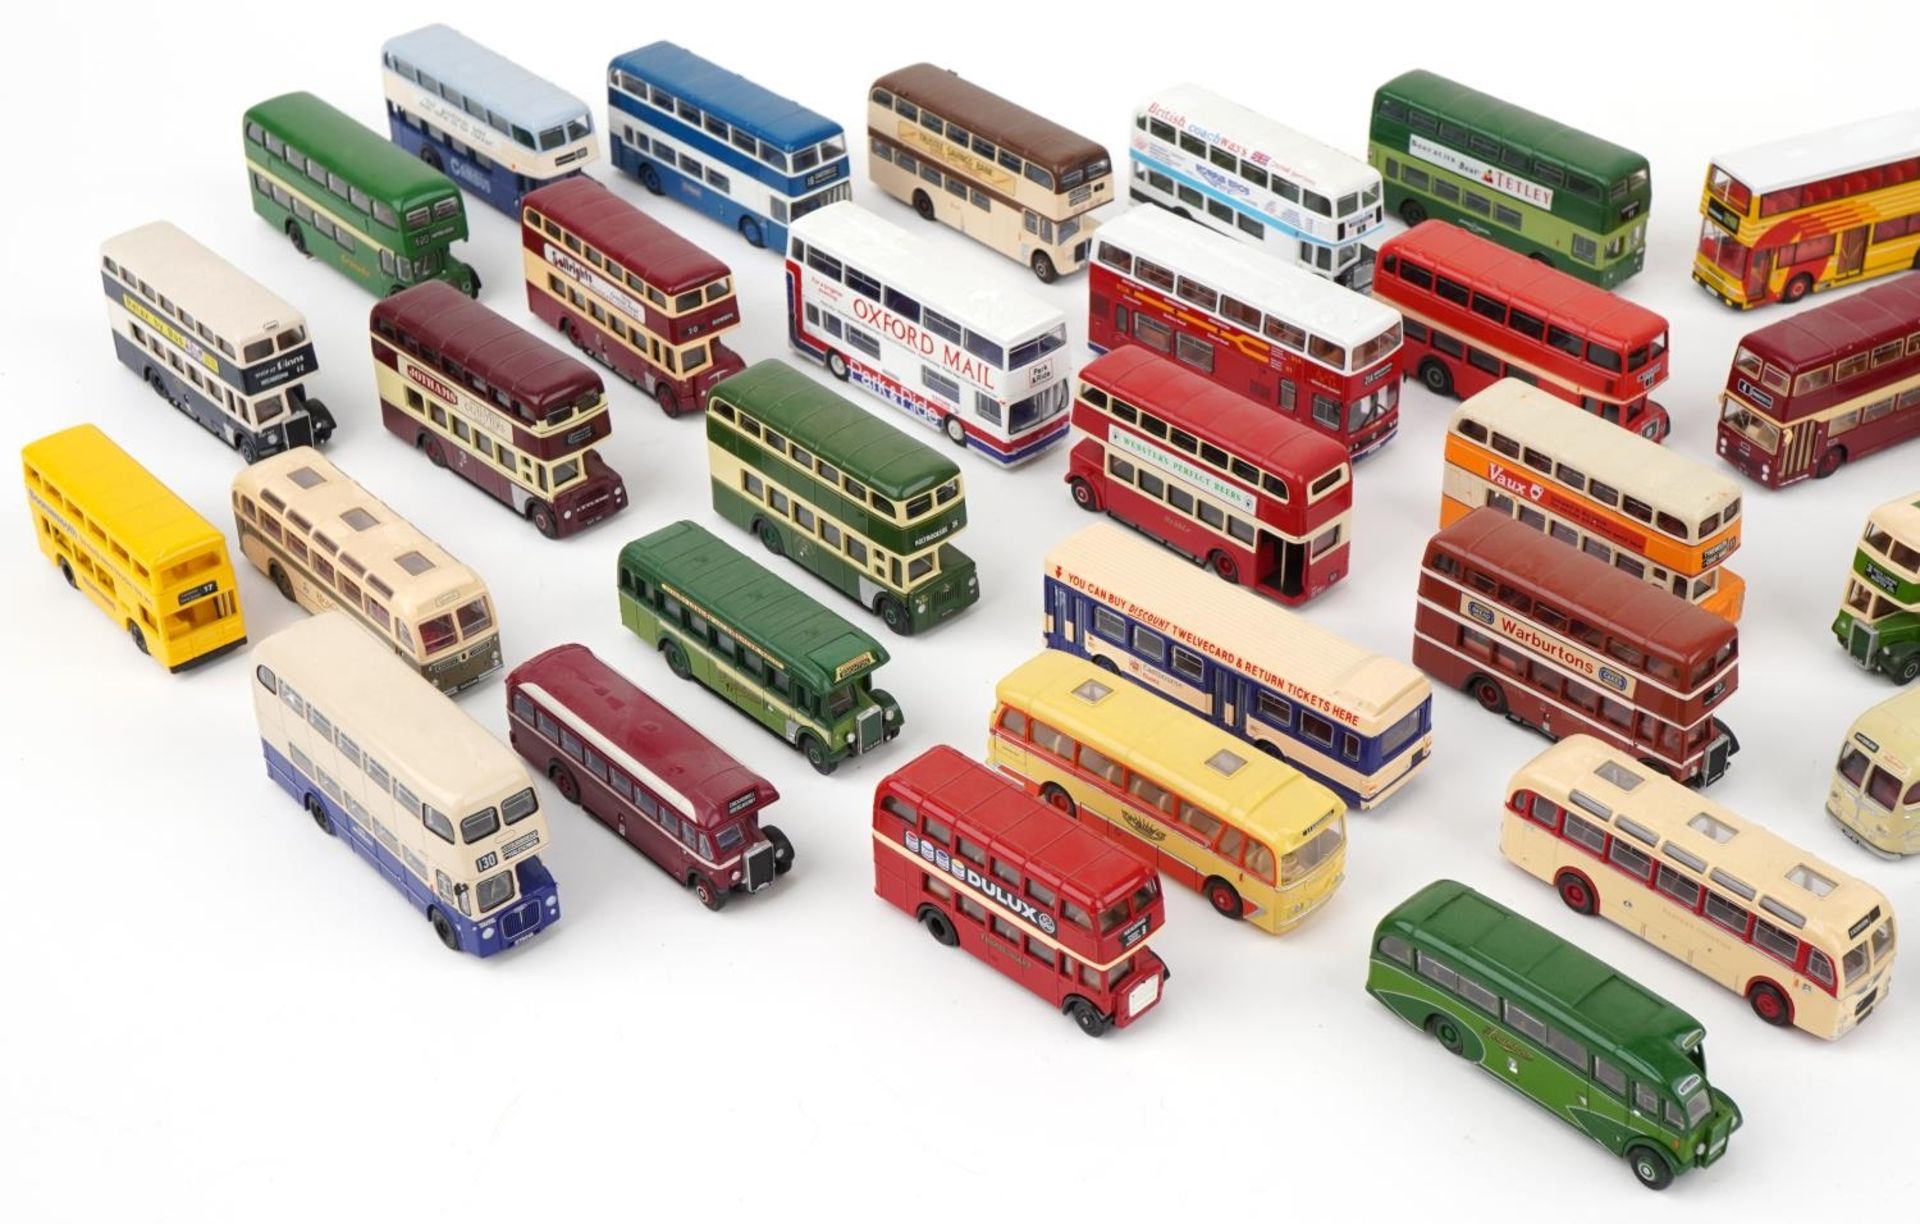 Large collection of diecast model buses, predominantly Corgi and Exclusive First Editions - Image 2 of 3